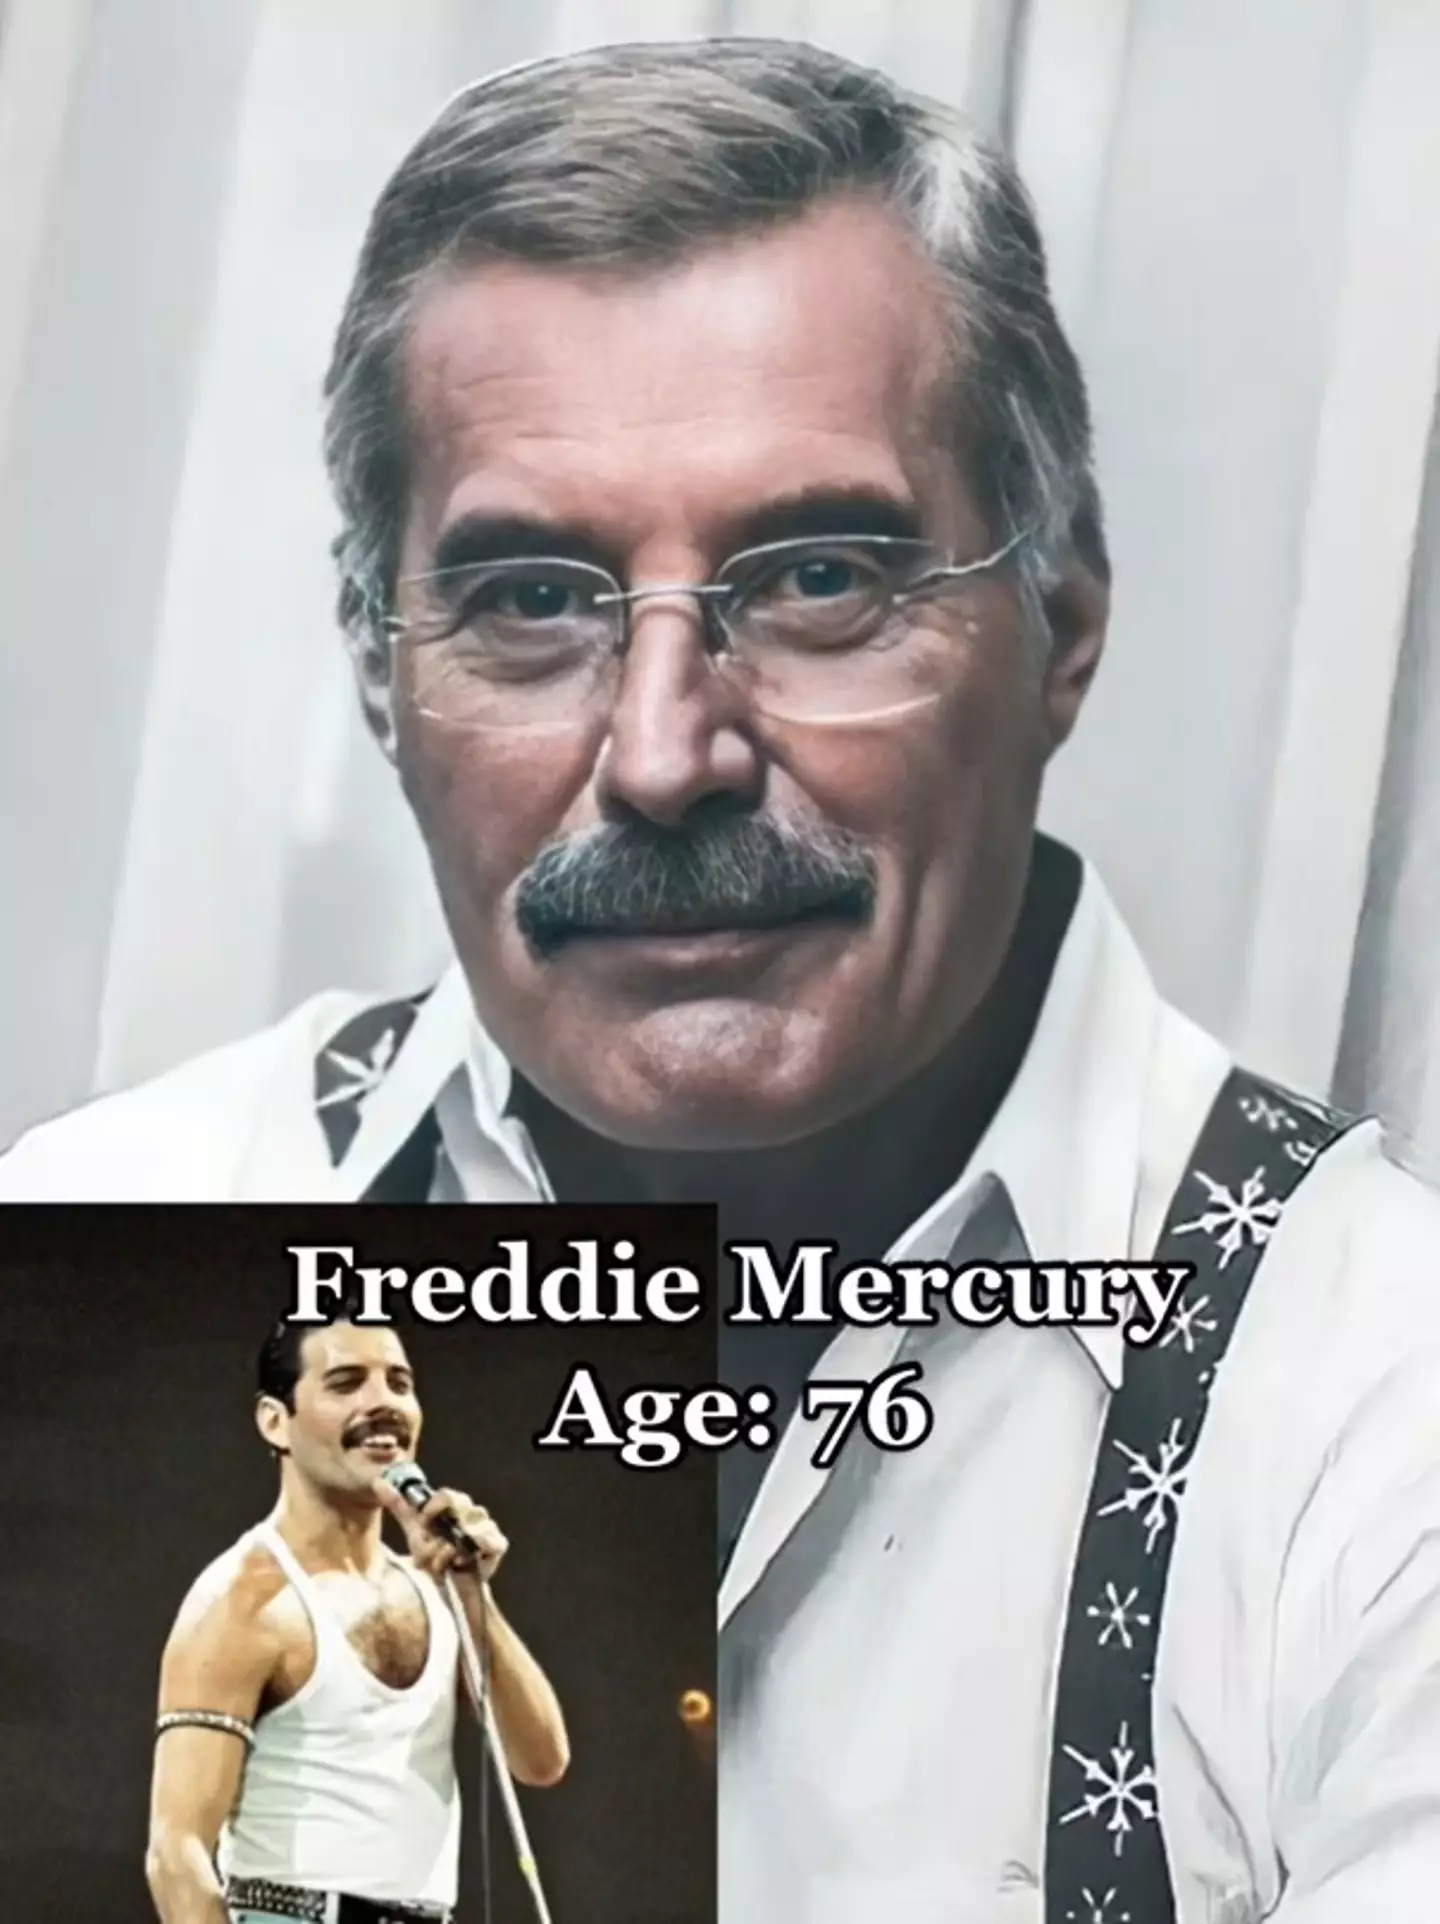 Freddie Mercury would have kept the moustache, apparently.